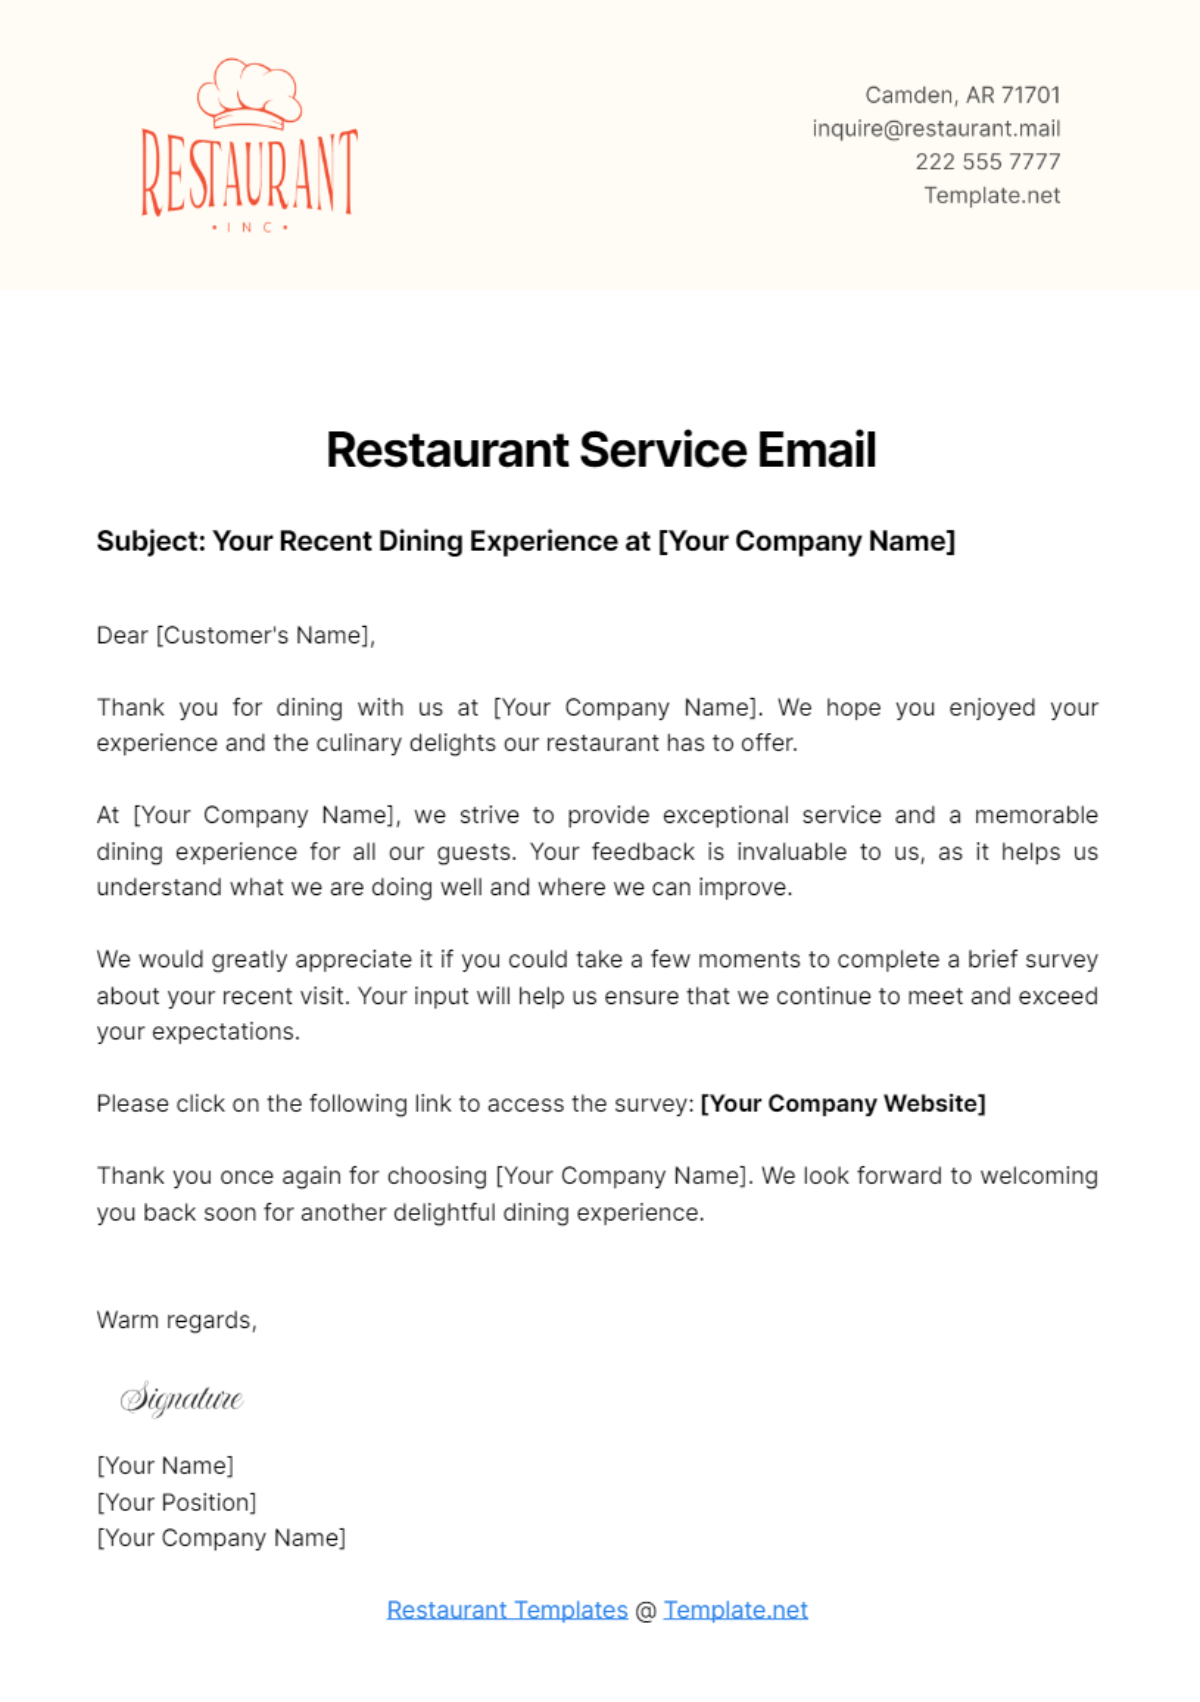 Free Restaurant Service Email Template